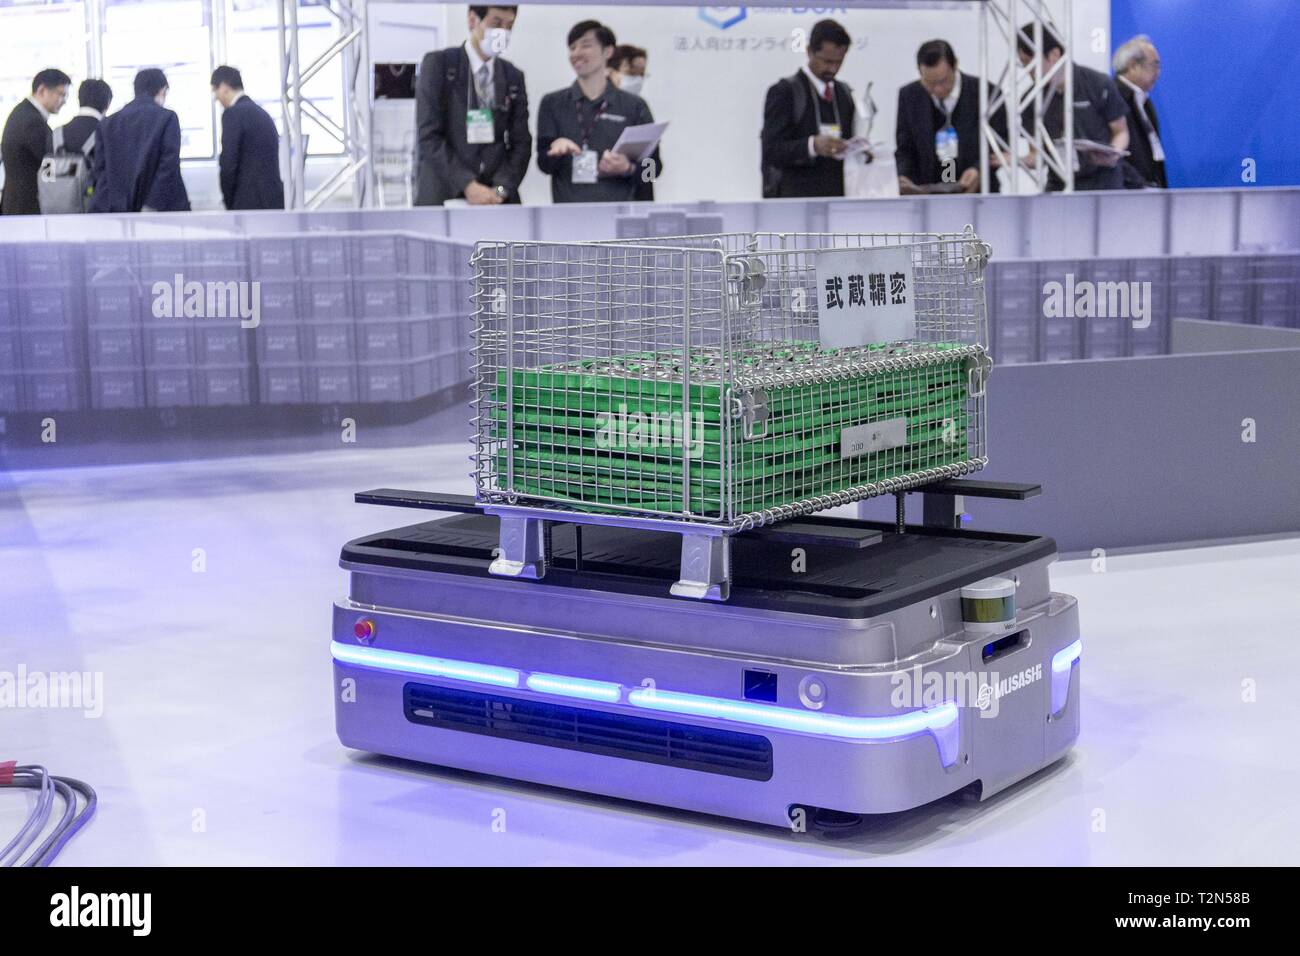 Tokyo, Japan. 3rd Apr, 2019. An autonomous driving transport robot performs during the 3rd Artificial Intelligence Exhibition and Conference (AI EXPO Tokyo 2019) in Tokyo BigSight. AI Expo is Japan's largest trade show specialized in AI technologies and services for professionals involved in the field. Credit: Rodrigo Reyes Marin/ZUMA Wire/Alamy Live News Stock Photo